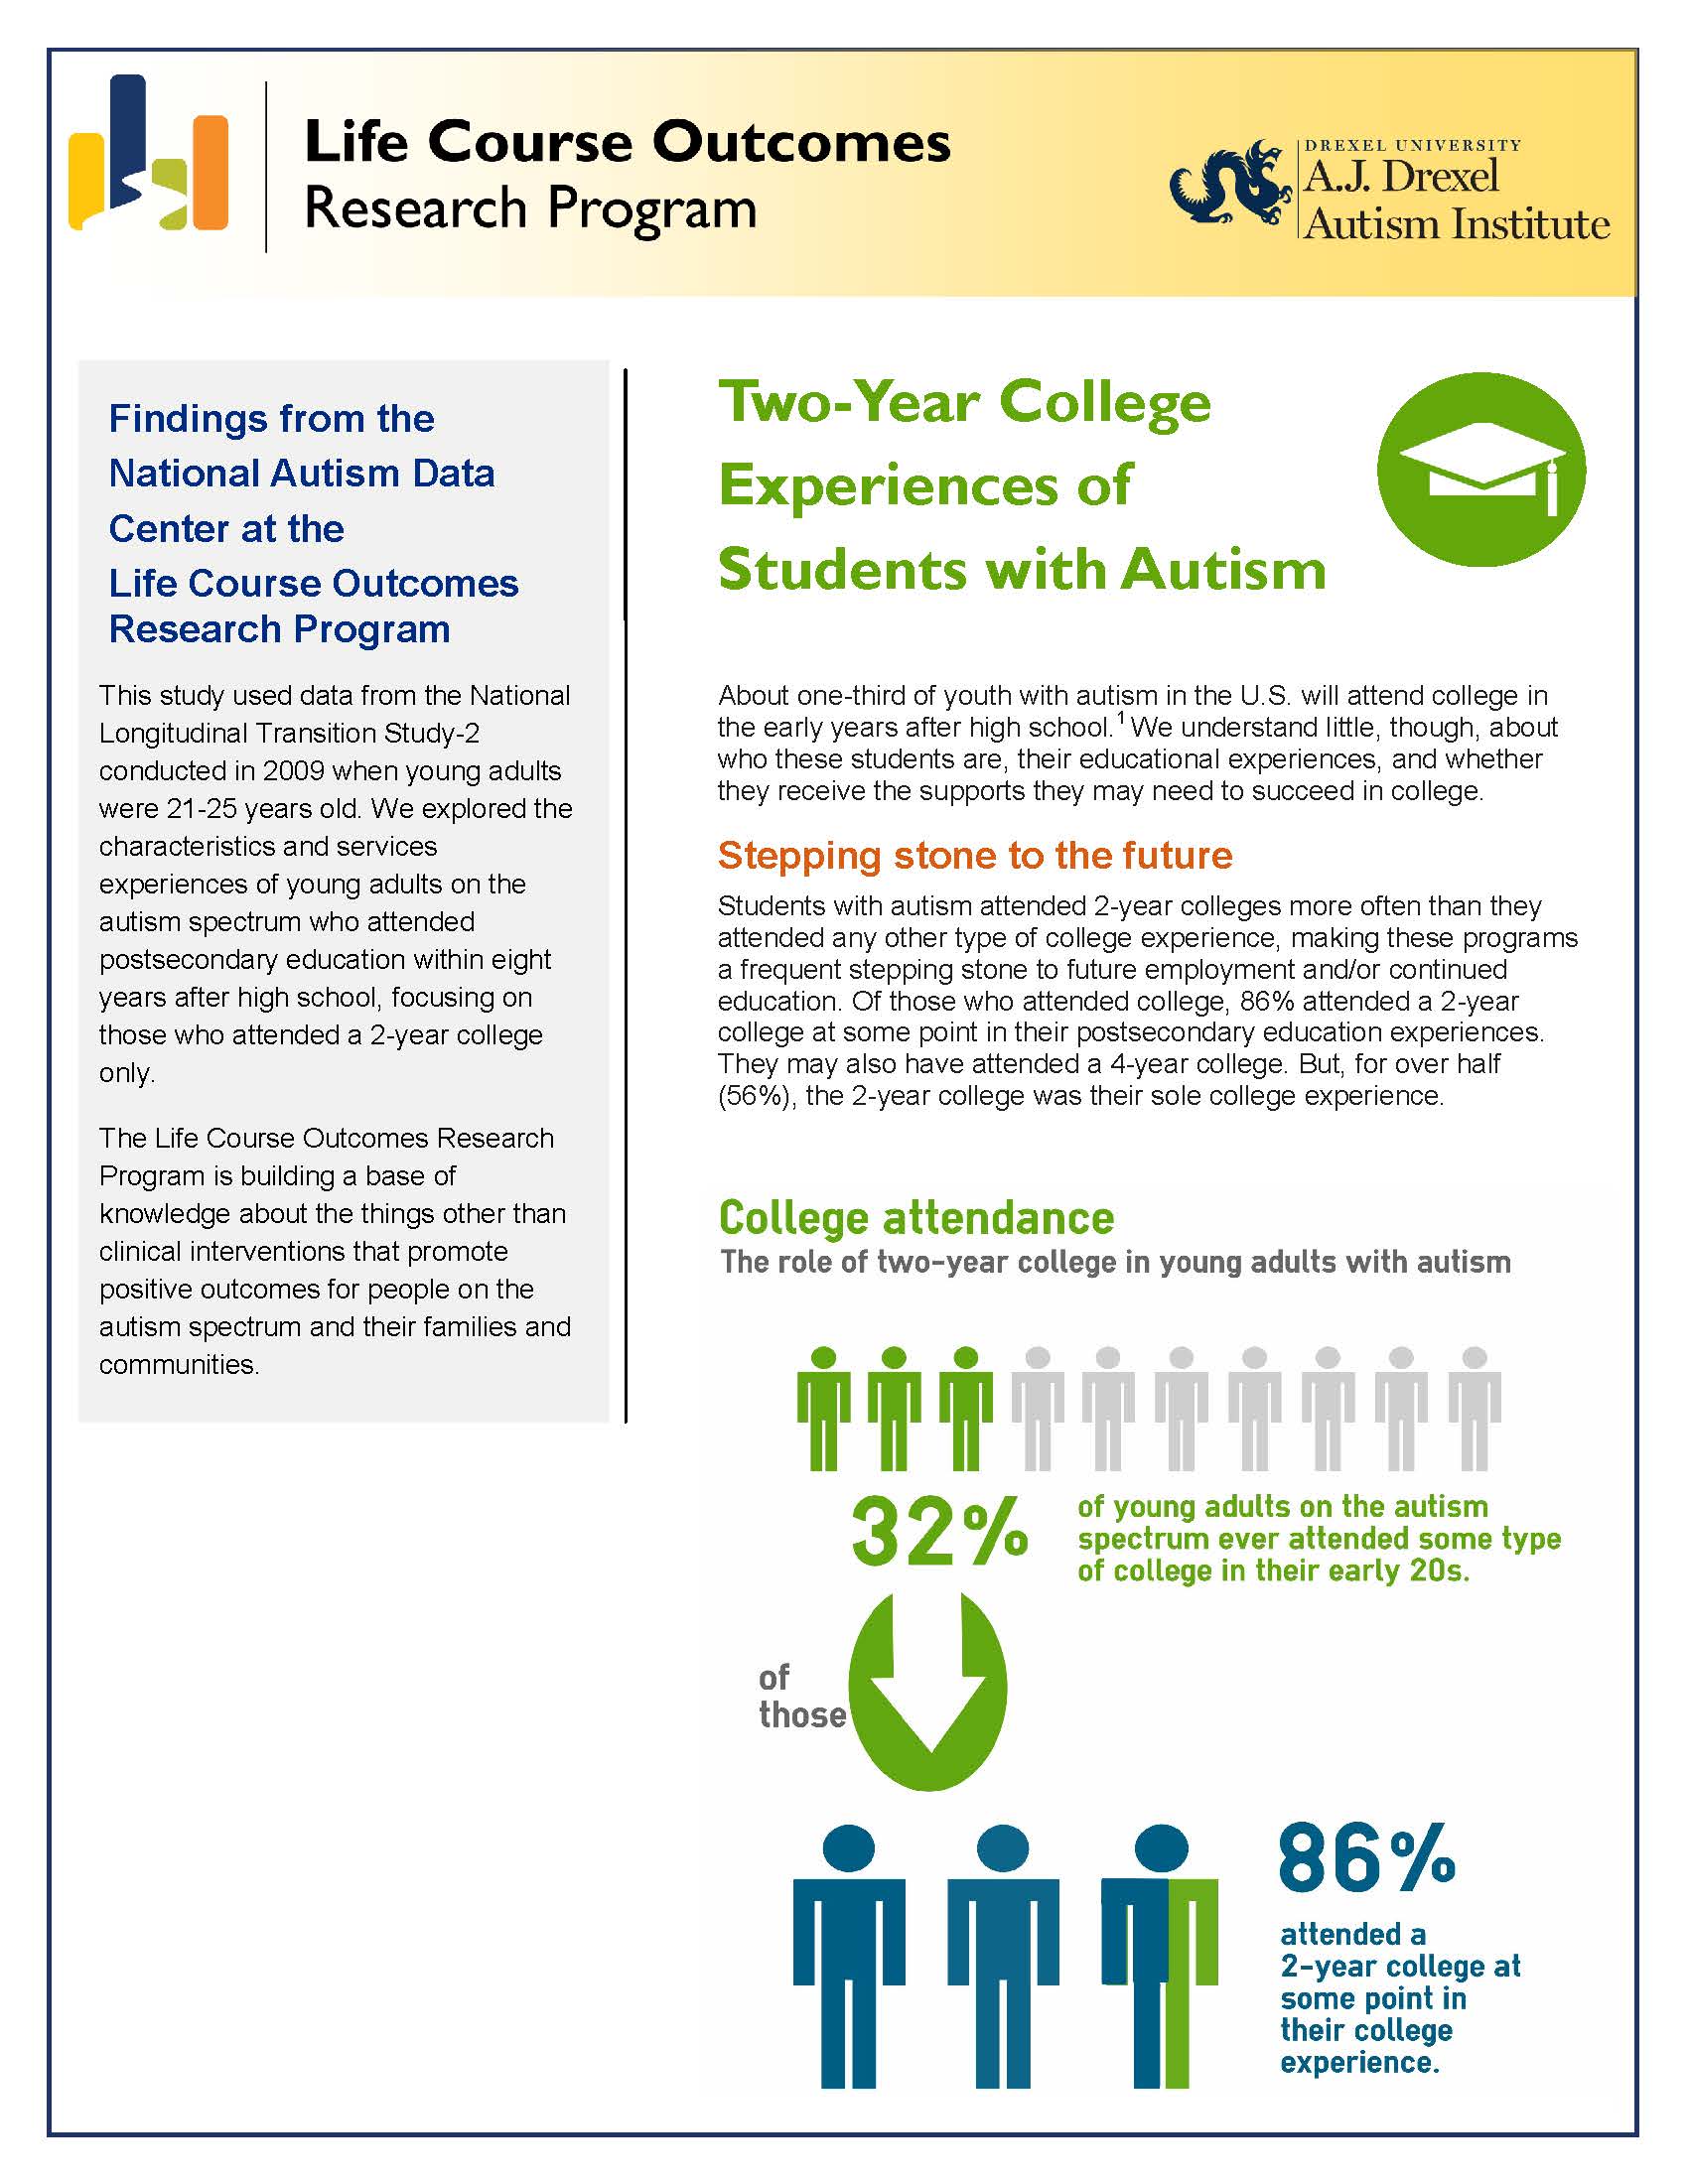 Two-year college experiences of students with autism